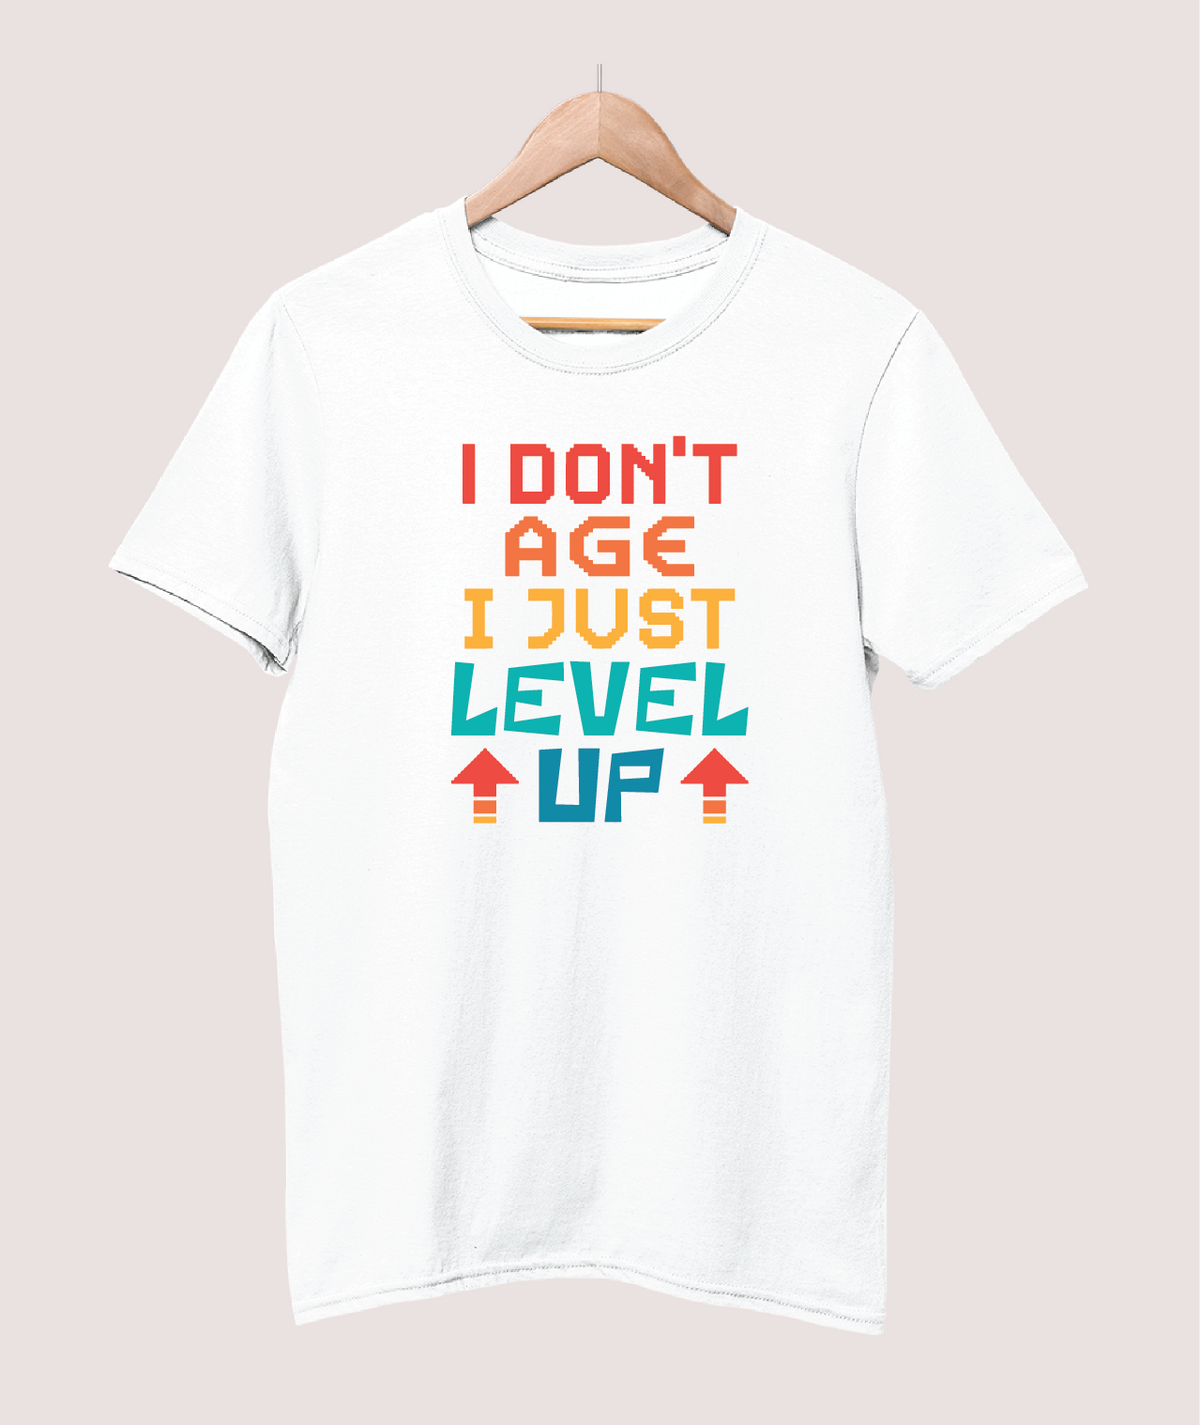 Age level up gaming T-shirt